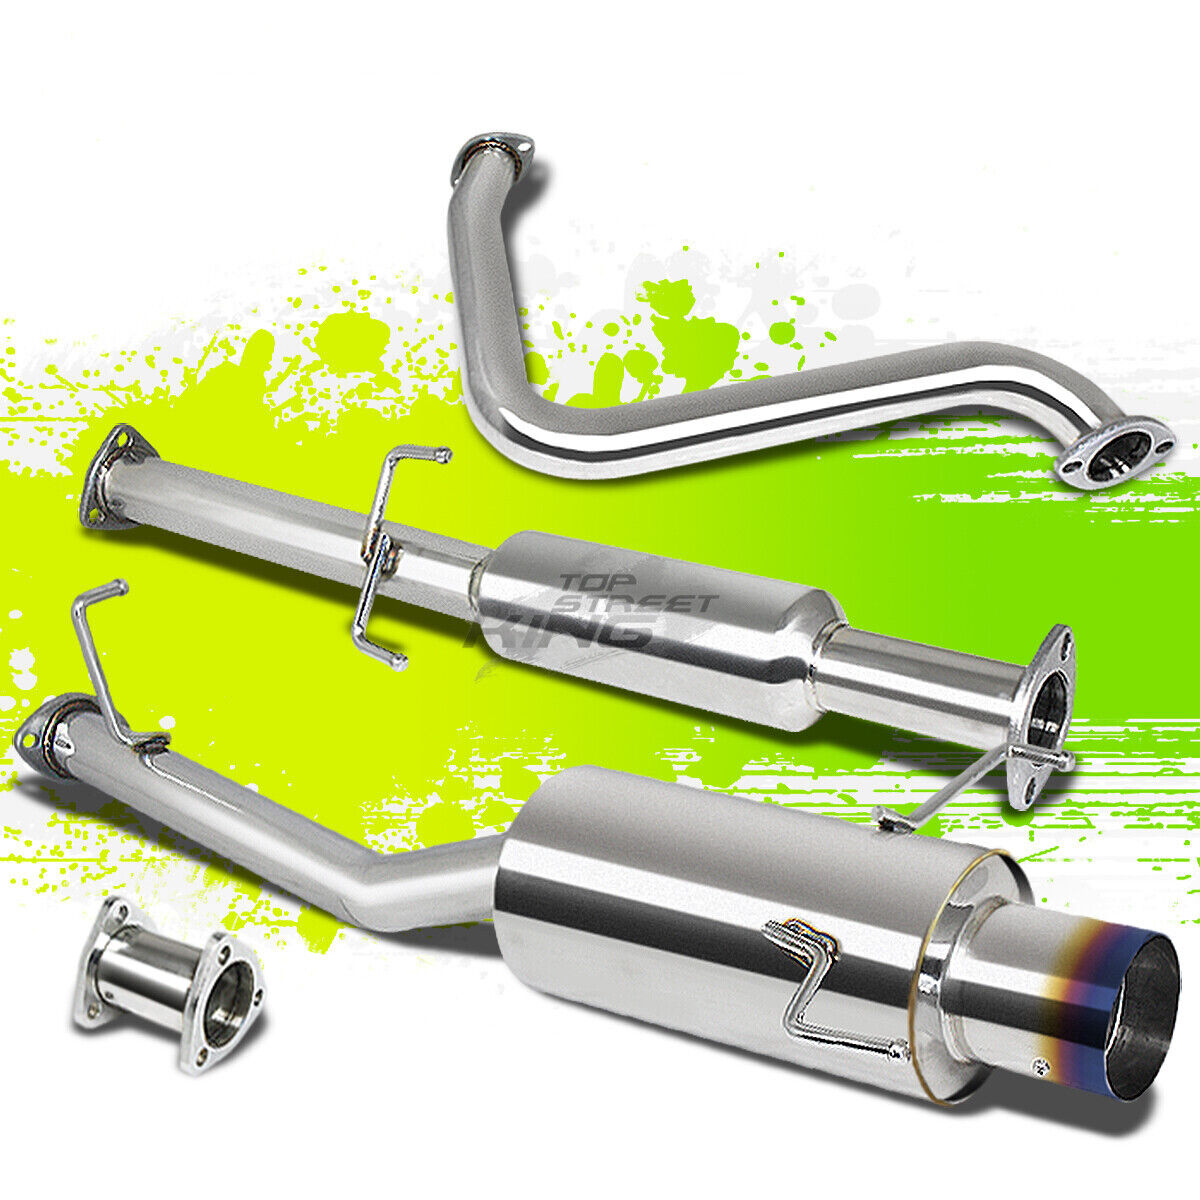 SINGLE PATH STAINLESS CAT CATBACK EXHAUST FOR 97-01 HONDA PRELUDE BB6 H22A4